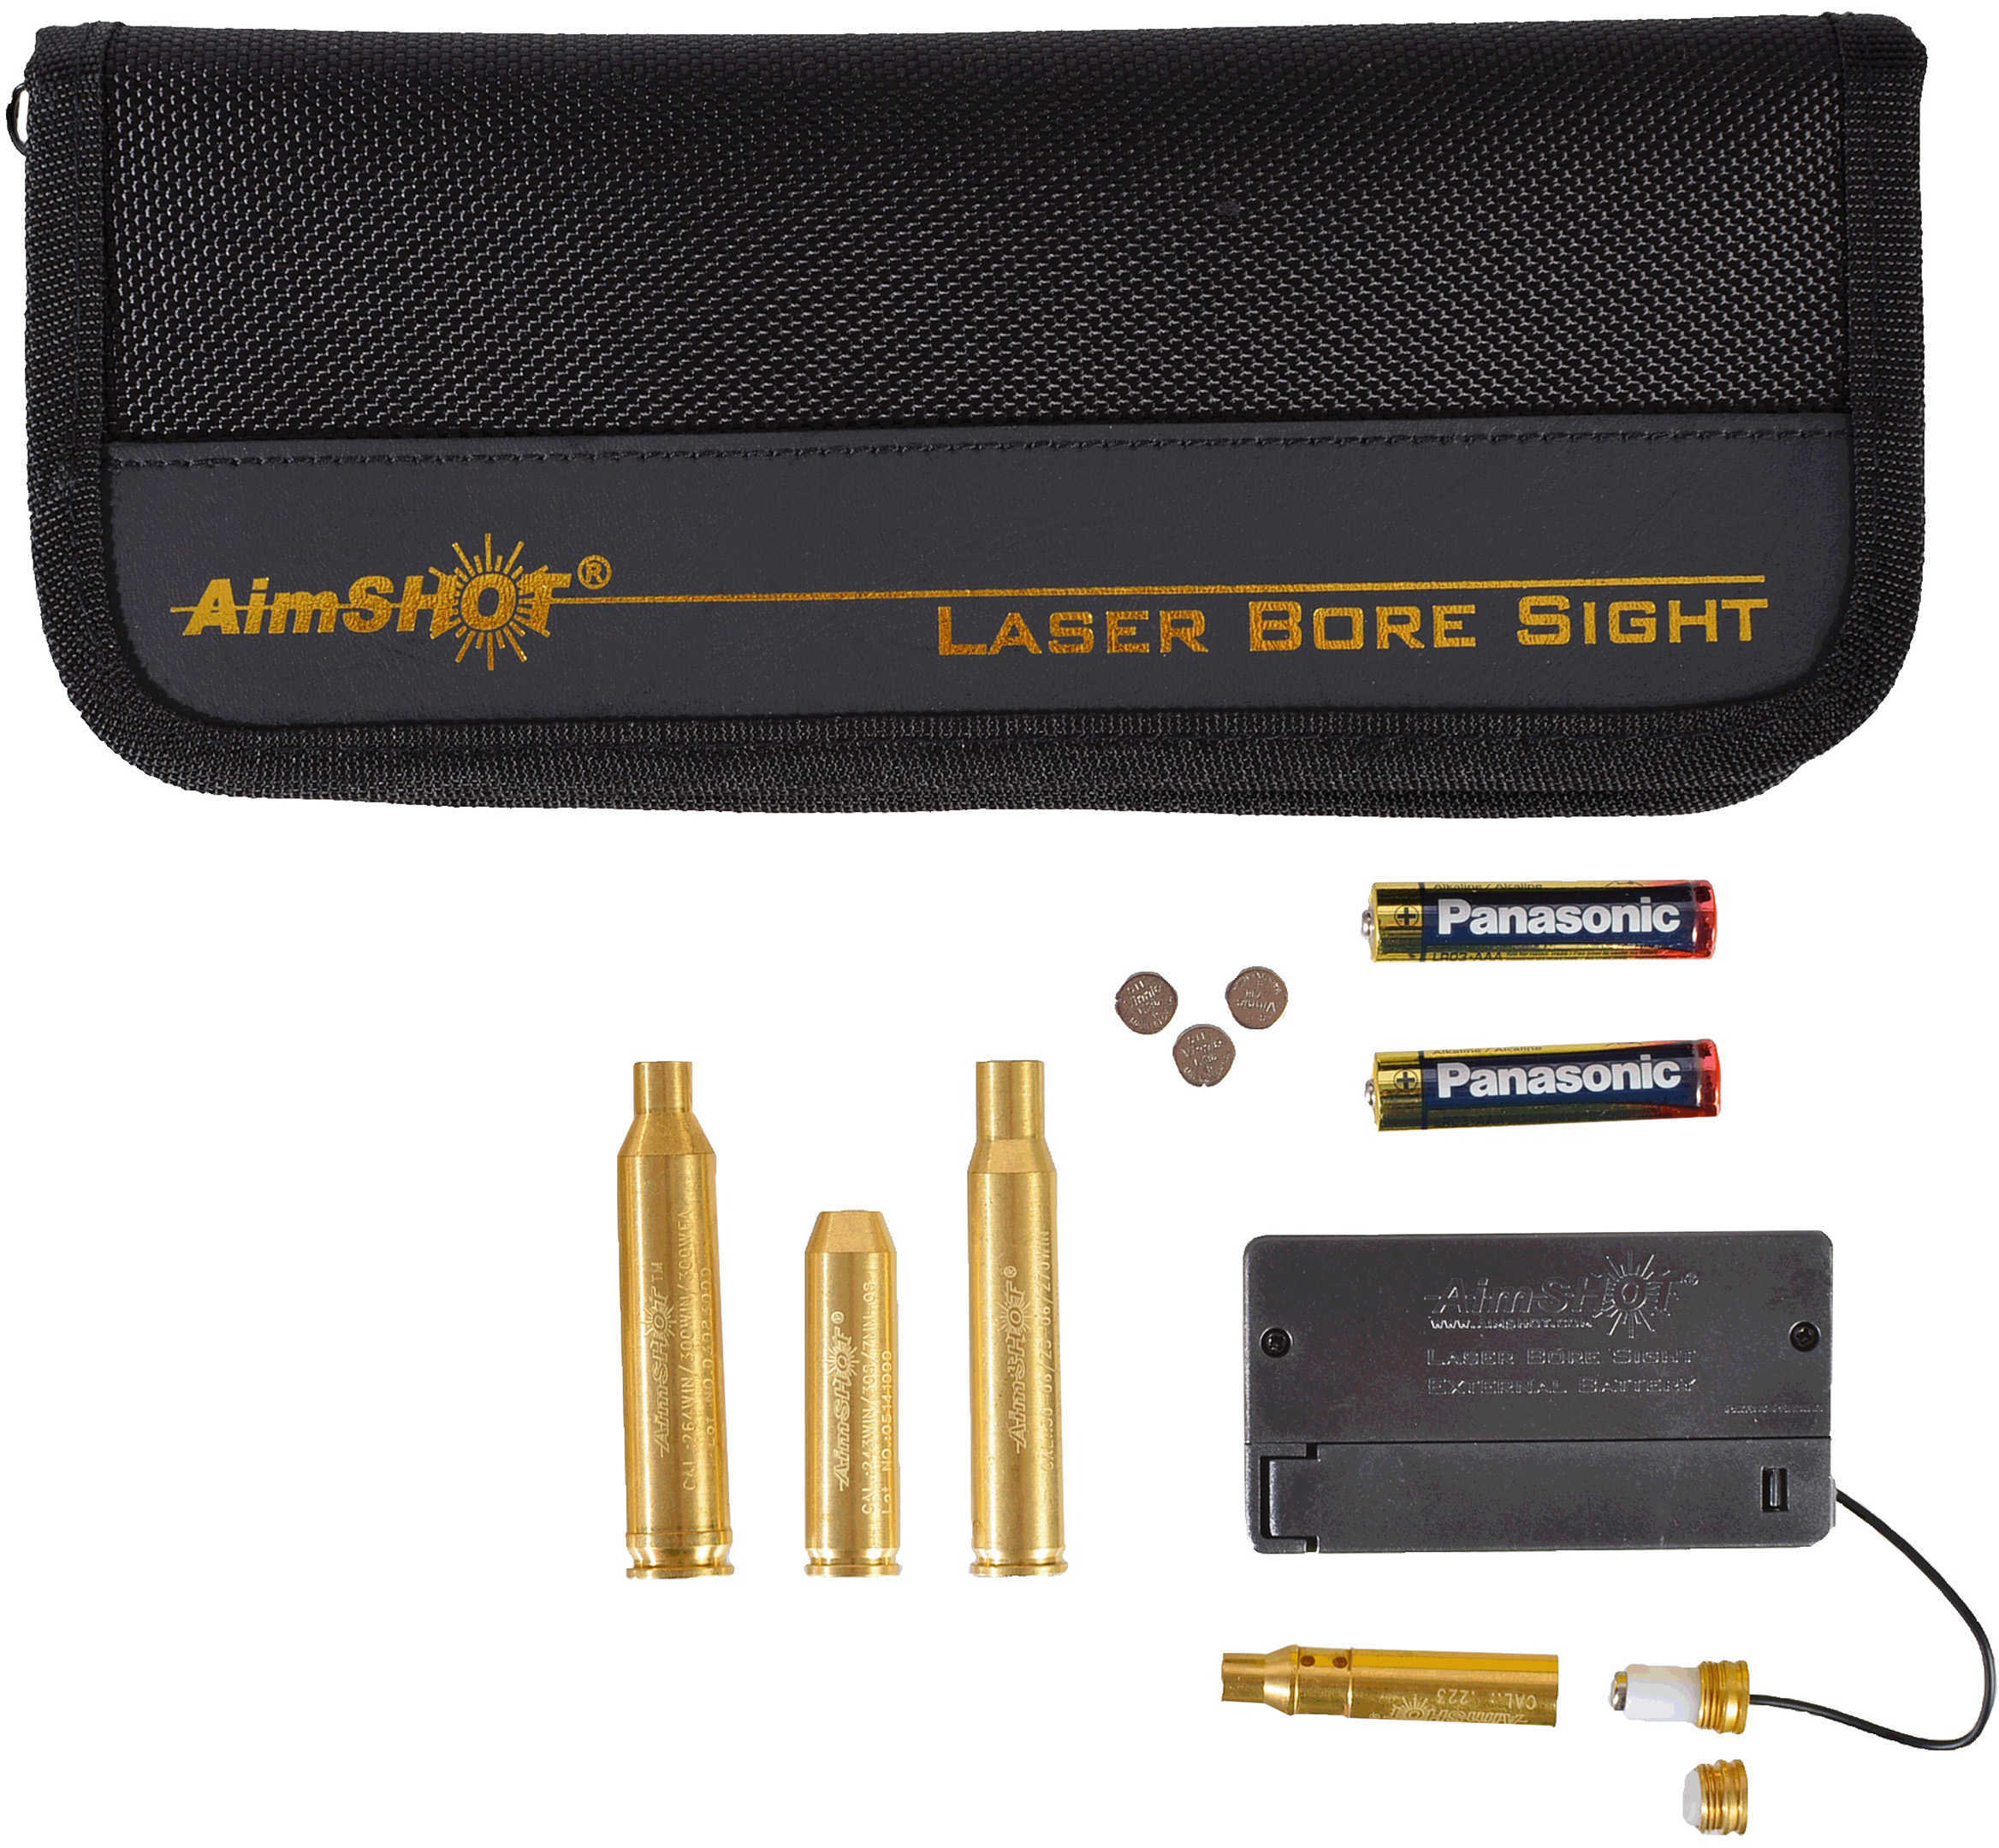 Aimshot Rifle Kit Red Laser Modular Boresight For 223 Arbors 243/308/7mm-08/264/300 Win & Weatherby/30-06/25-06/270